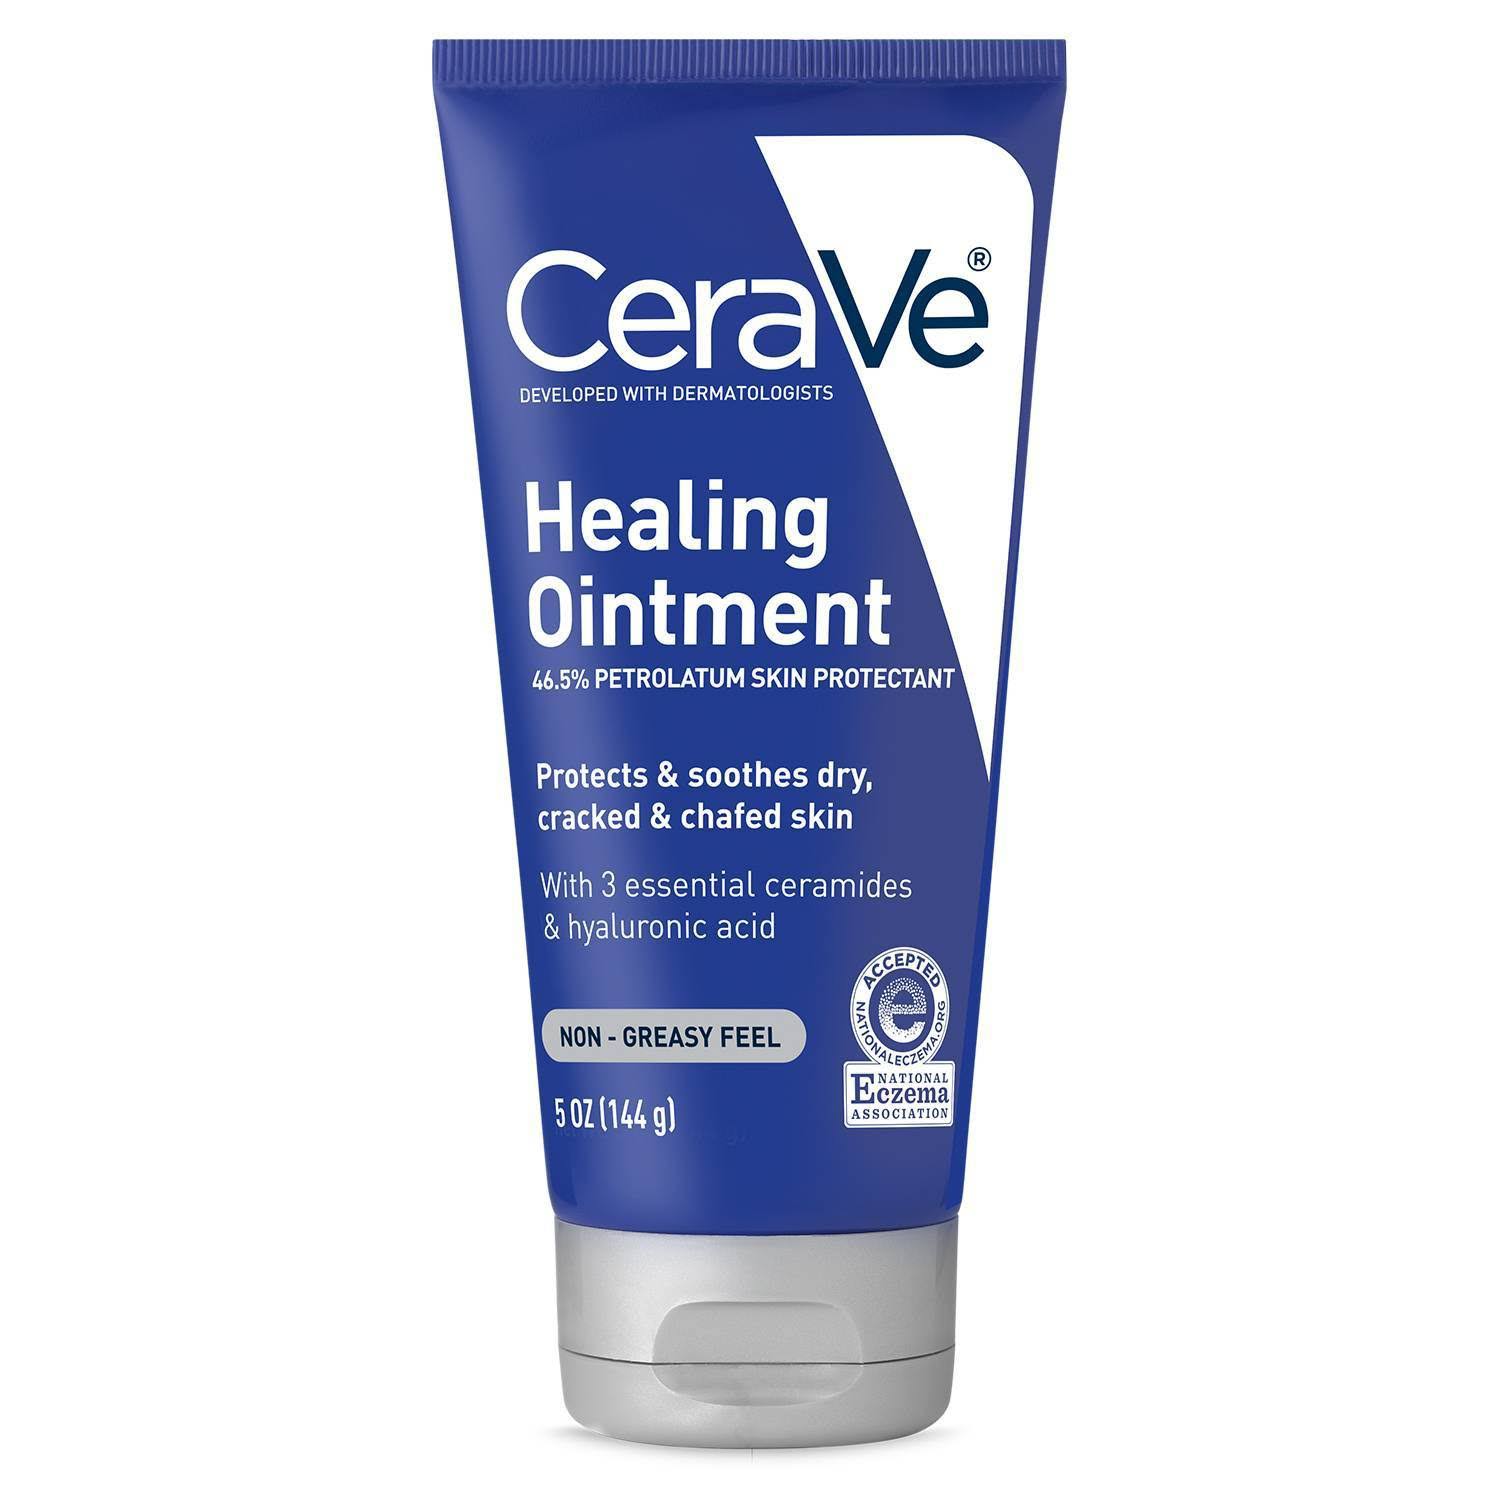 Cerave Healing Ointment - 5 oz